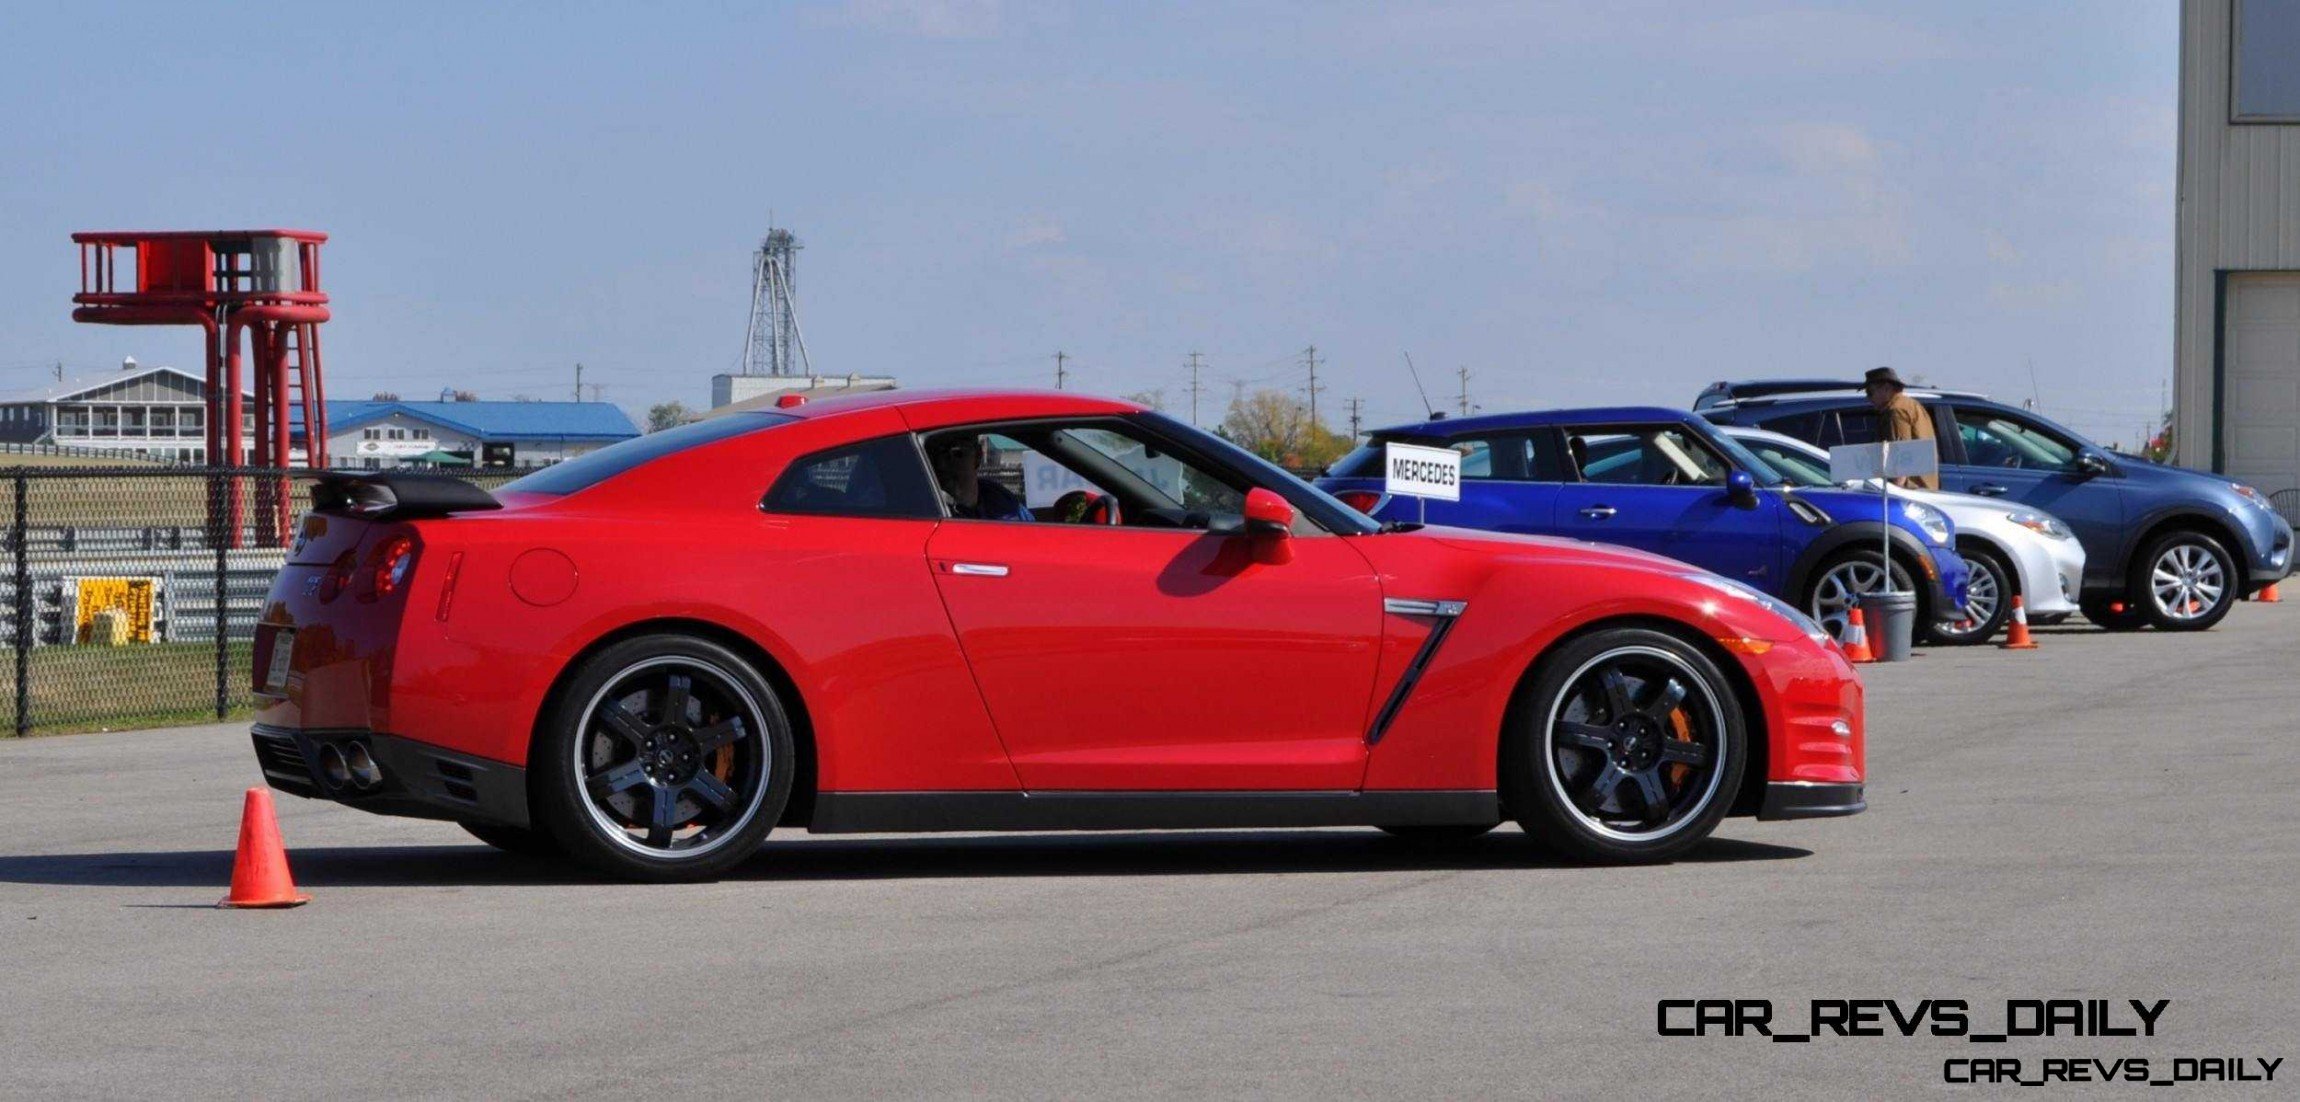 2013 Nissan gt r daily driver #1